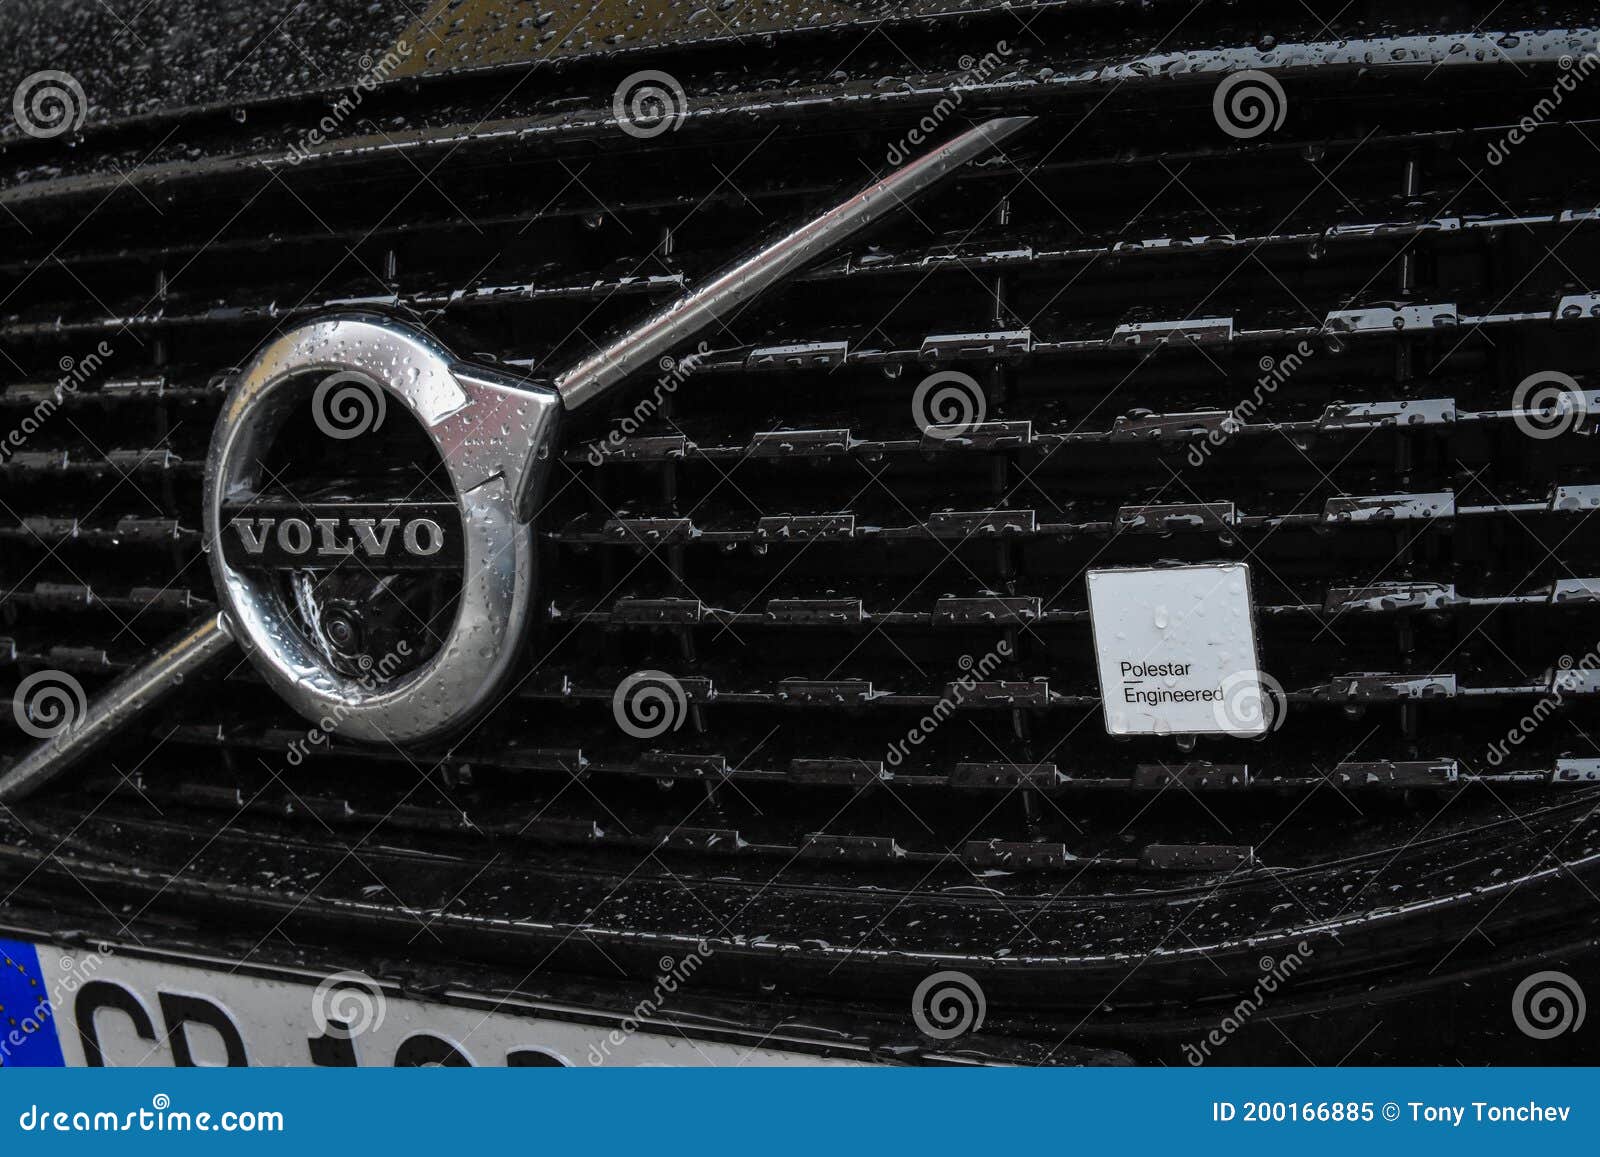 Volvo XC60 Polestar Engineered Test Drive Sofia Editorial Image - Image of  elements, exclusive: 200166885